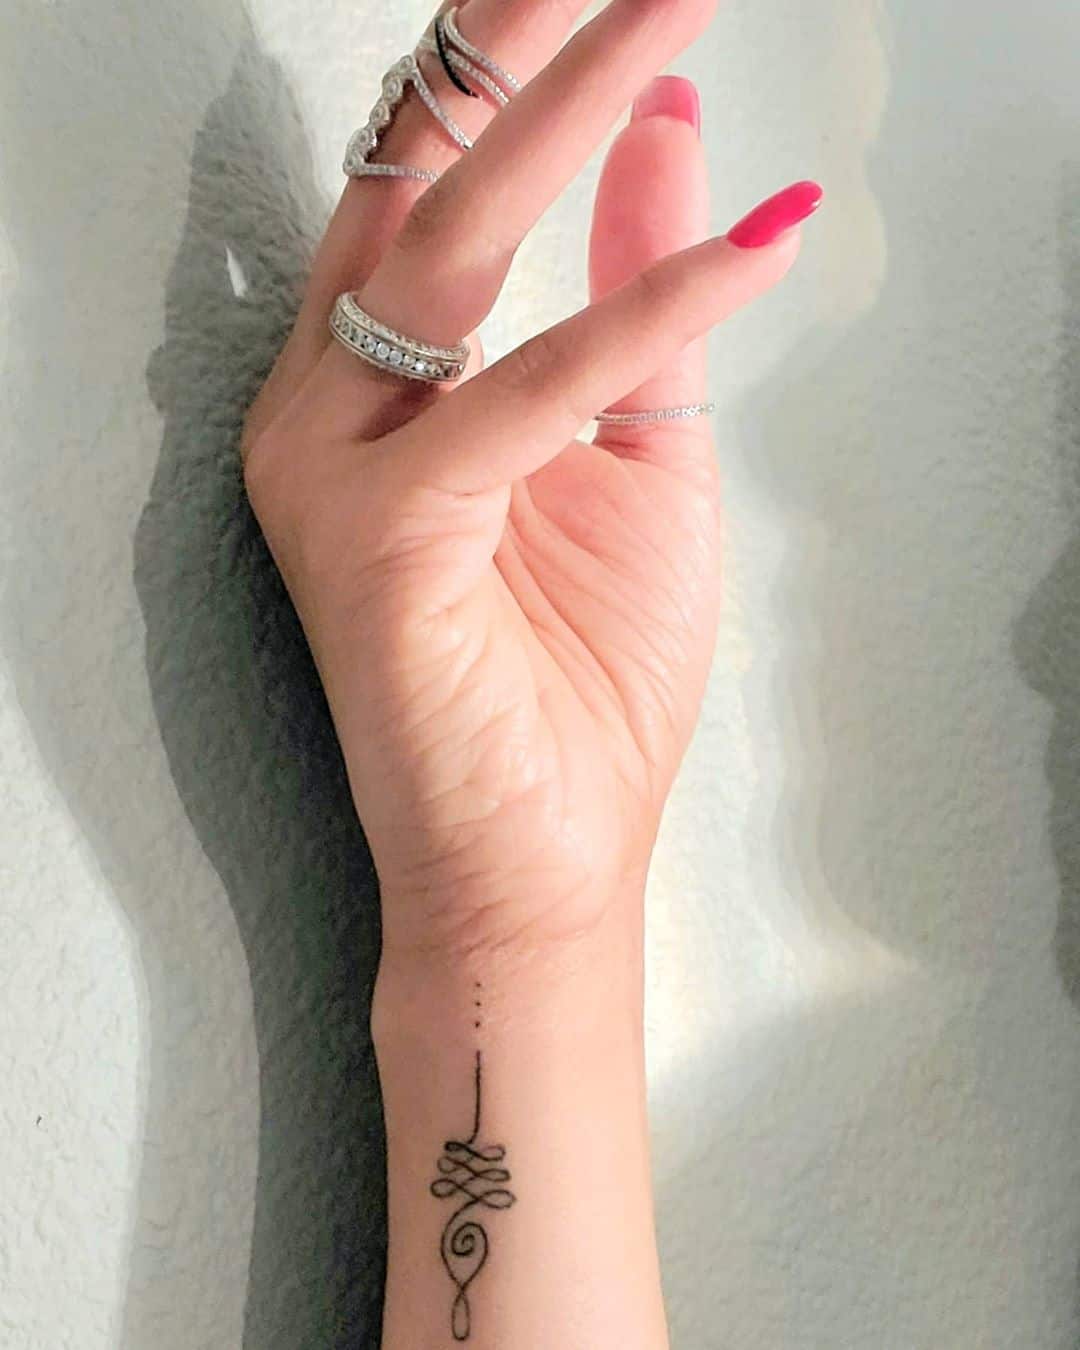 50 Small Wrist Tattoo Ideas - Get Inspiration For Your Next Tattoo